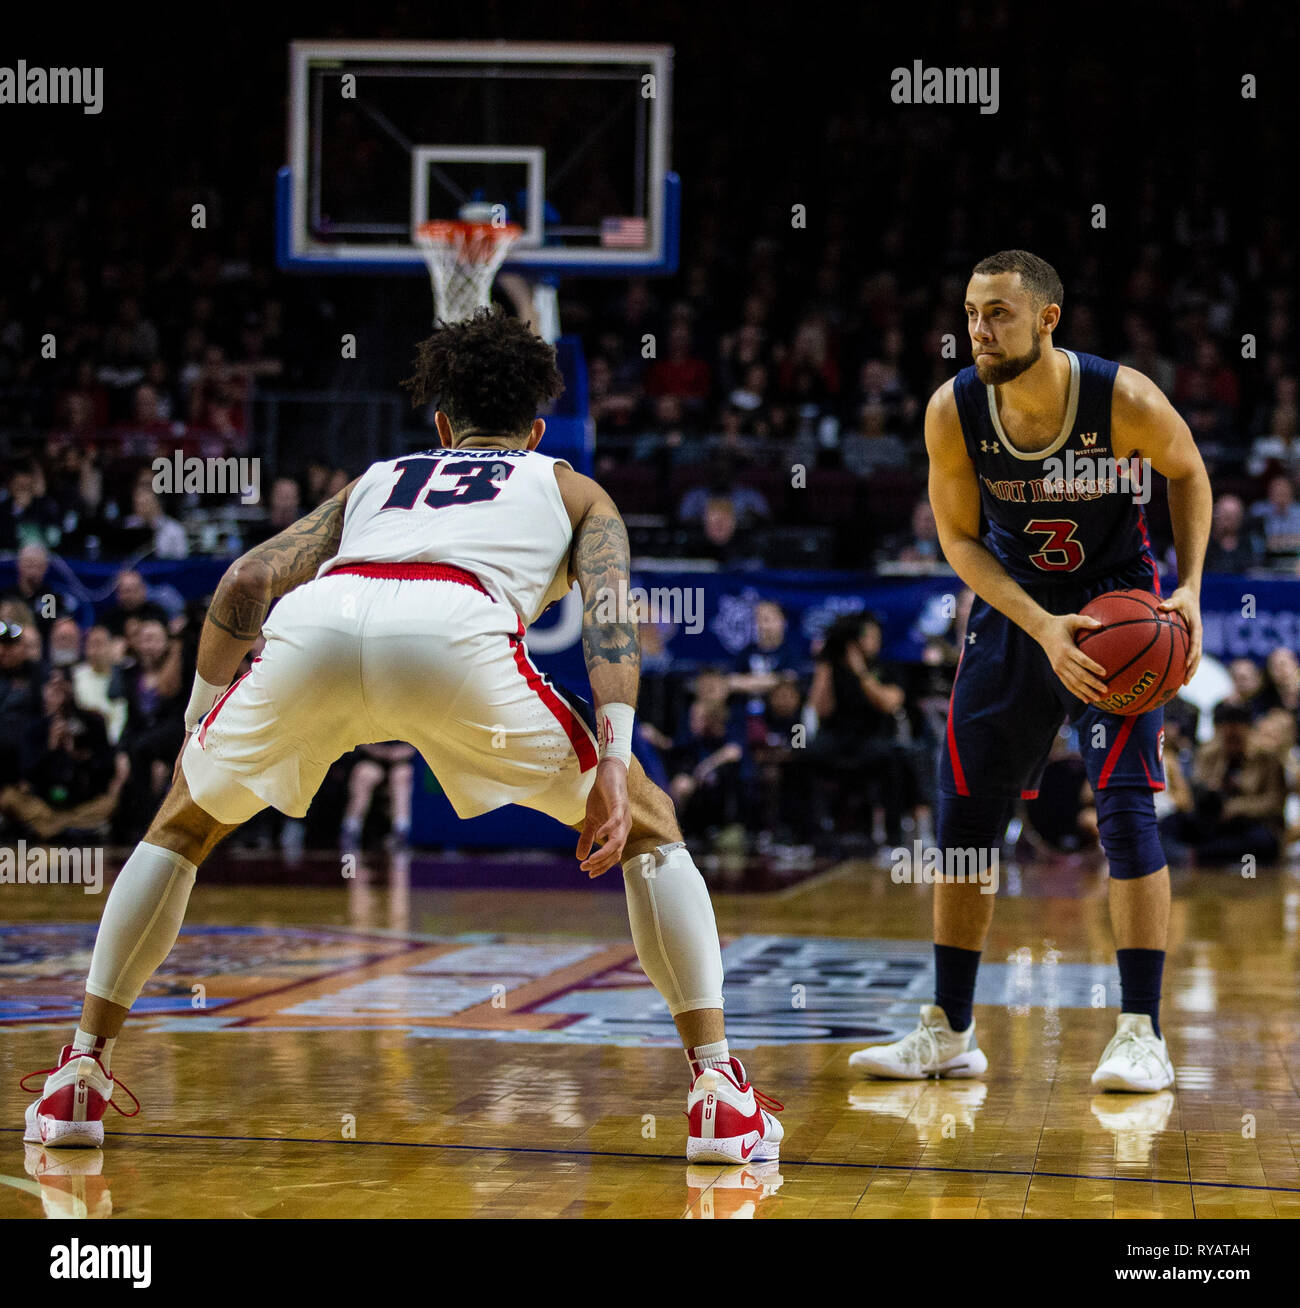 Mar 12 2019 Las Vegas, NV, U.S.A. St. Mary's guard Jordan Ford (3) sets the play during the NCAA West Coast Conference Men's Basketball Tournament championship between the Gonzaga Bulldogs and the Saint Mary's Gaels 60-47 win at Orleans Arena Las Vegas, NV. Thurman James/CSM Stock Photo